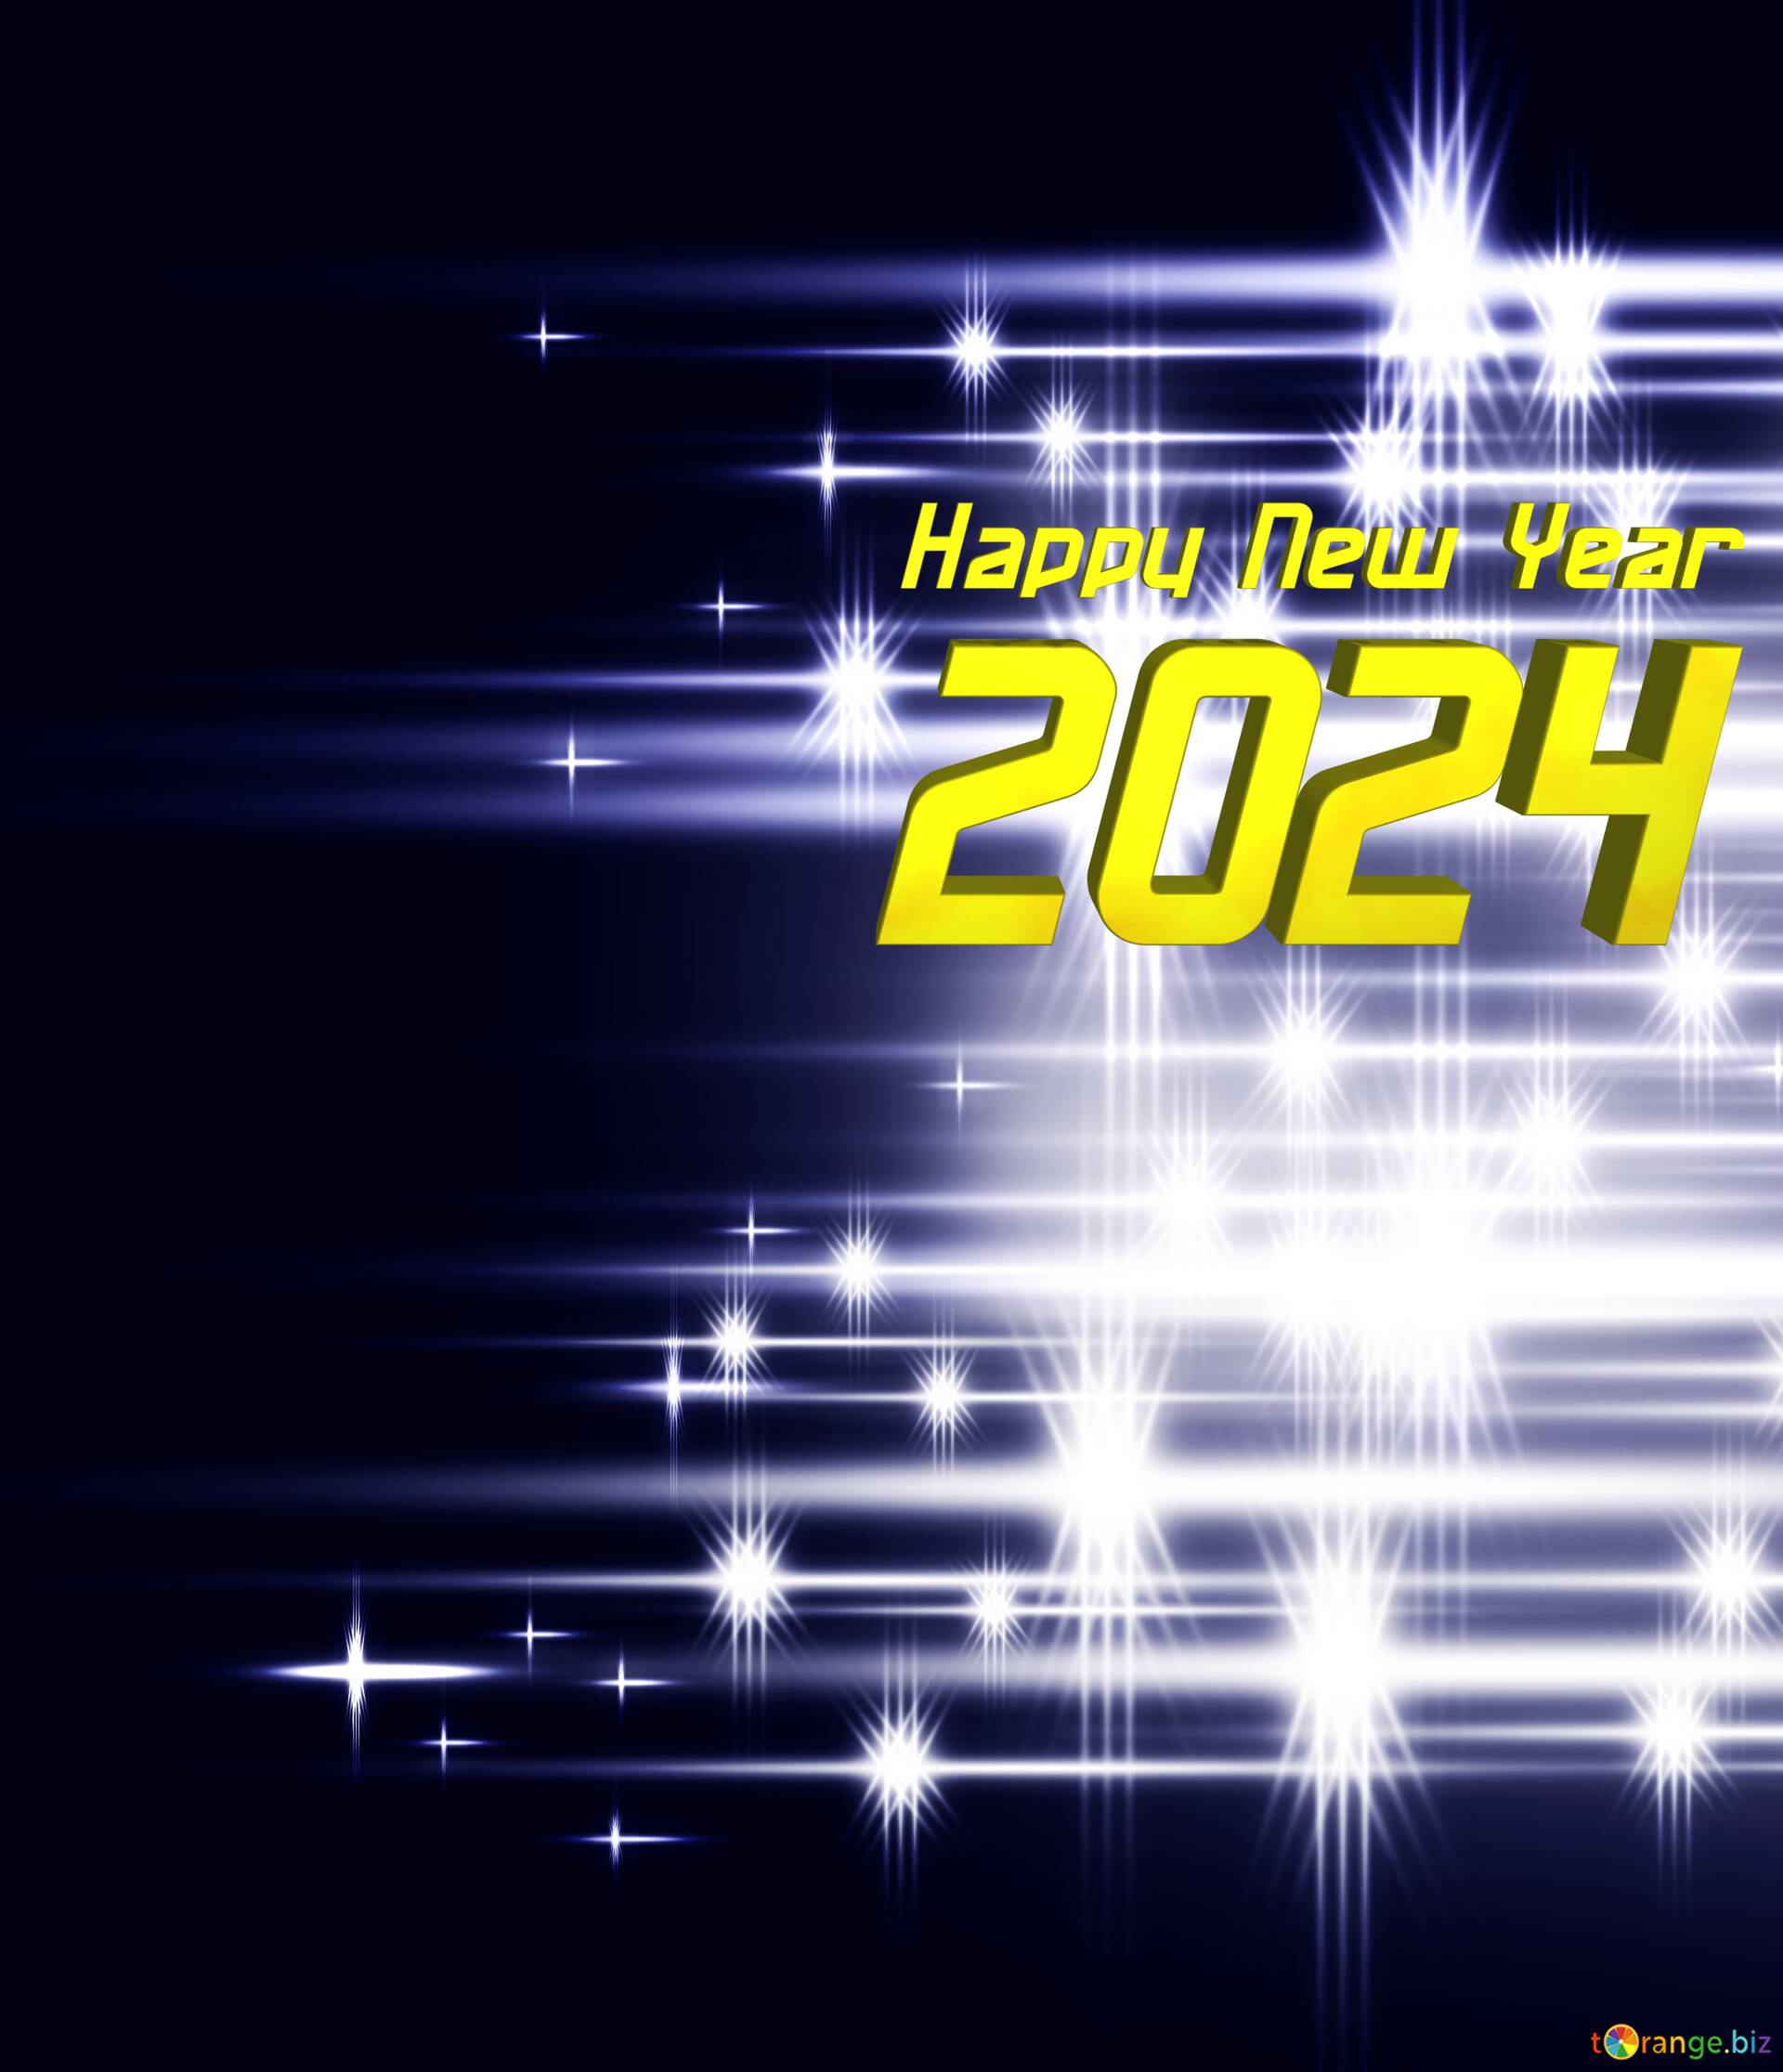 Download free picture Elegant shiny white bright background fog blue Happy  New Year 2022 on CC-BY License ~ Free Image Stock  ~ fx №222758